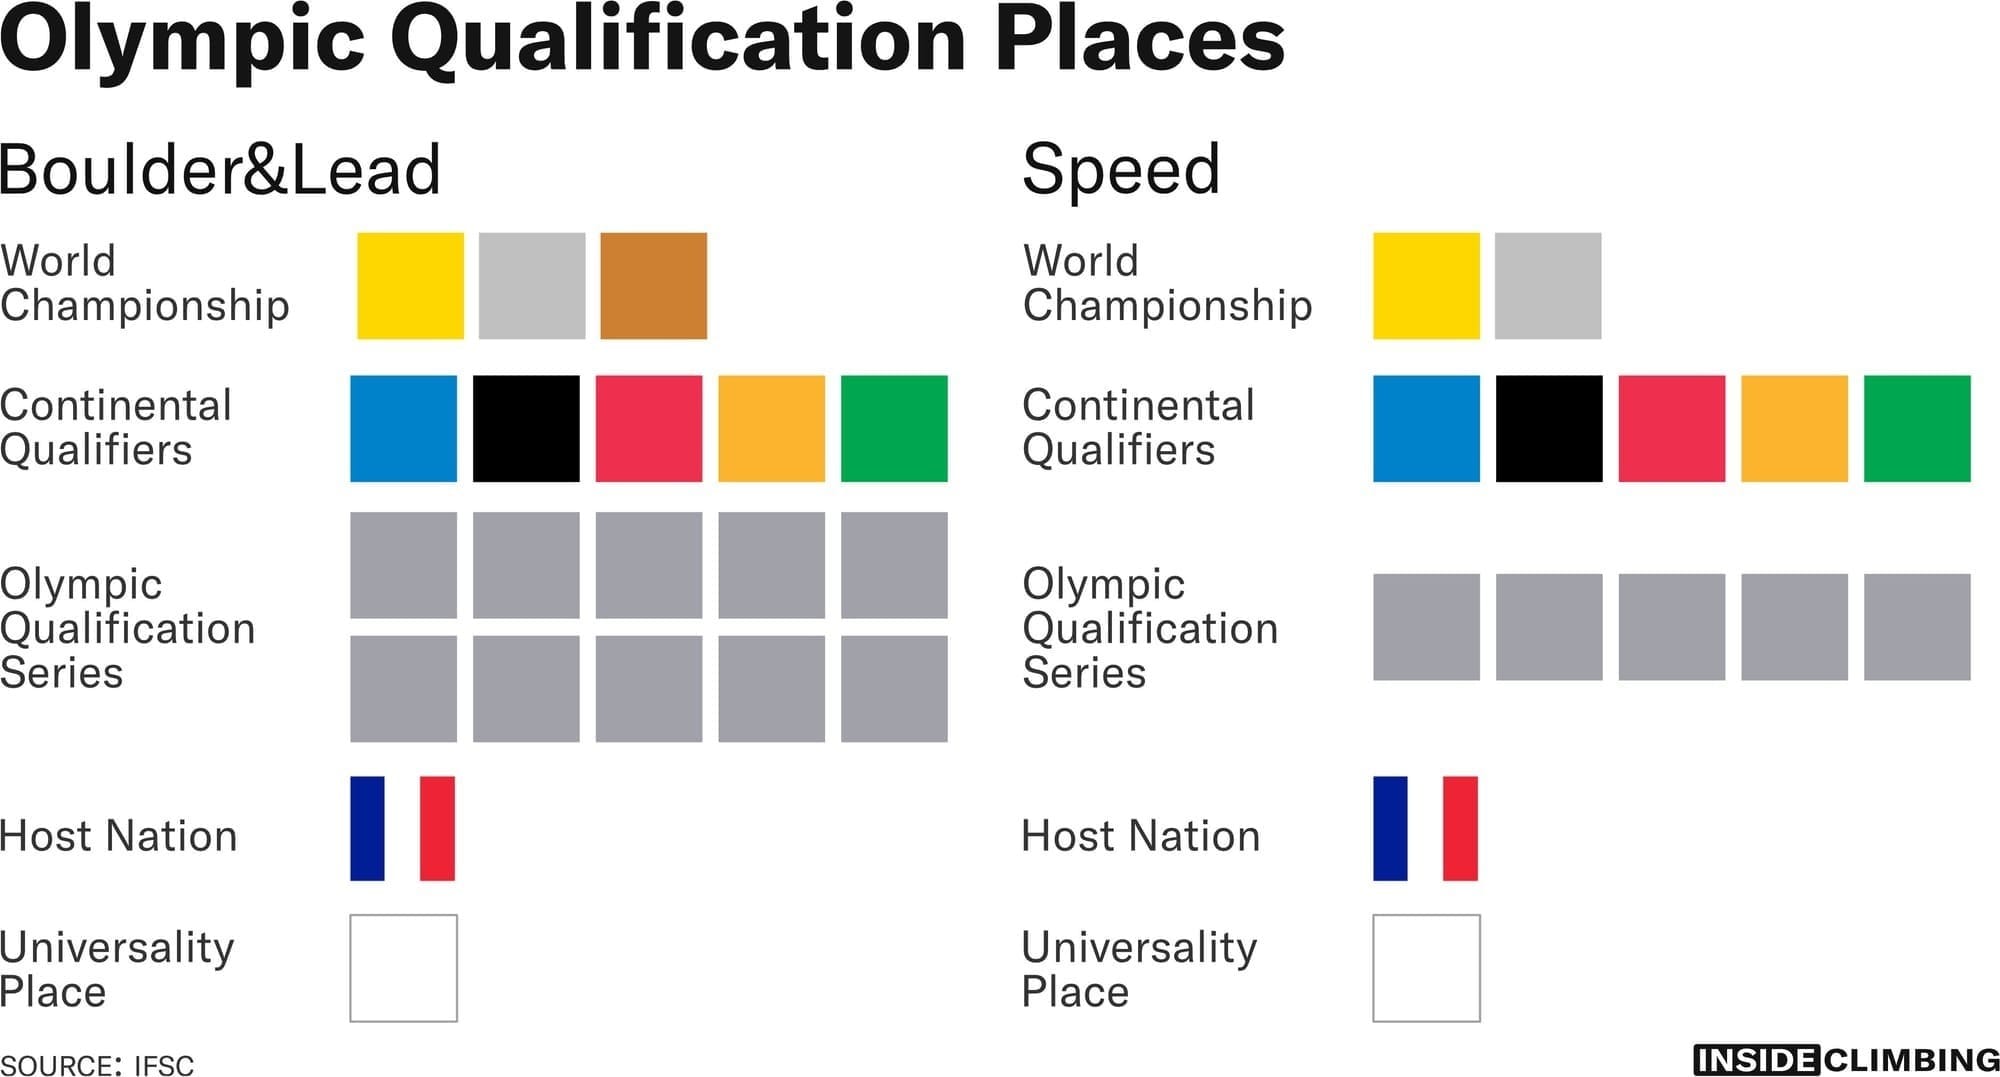 Sport Climbing Qualification places for Paris 2024. In Boulder&Lead there are 3 places from the World Championship, 5 places from the 5 continental qualifers, and 10 from the 2024 Olympic Qualification Series. There is also a place for a French athlete and one Universality place. For Speed, there are 2 places from the World Championship, 5 places from the 5 continental qualifers, and 5 from the 2024 Olympic Qualification Series. There is also a place for a French athlete and one Universality place.